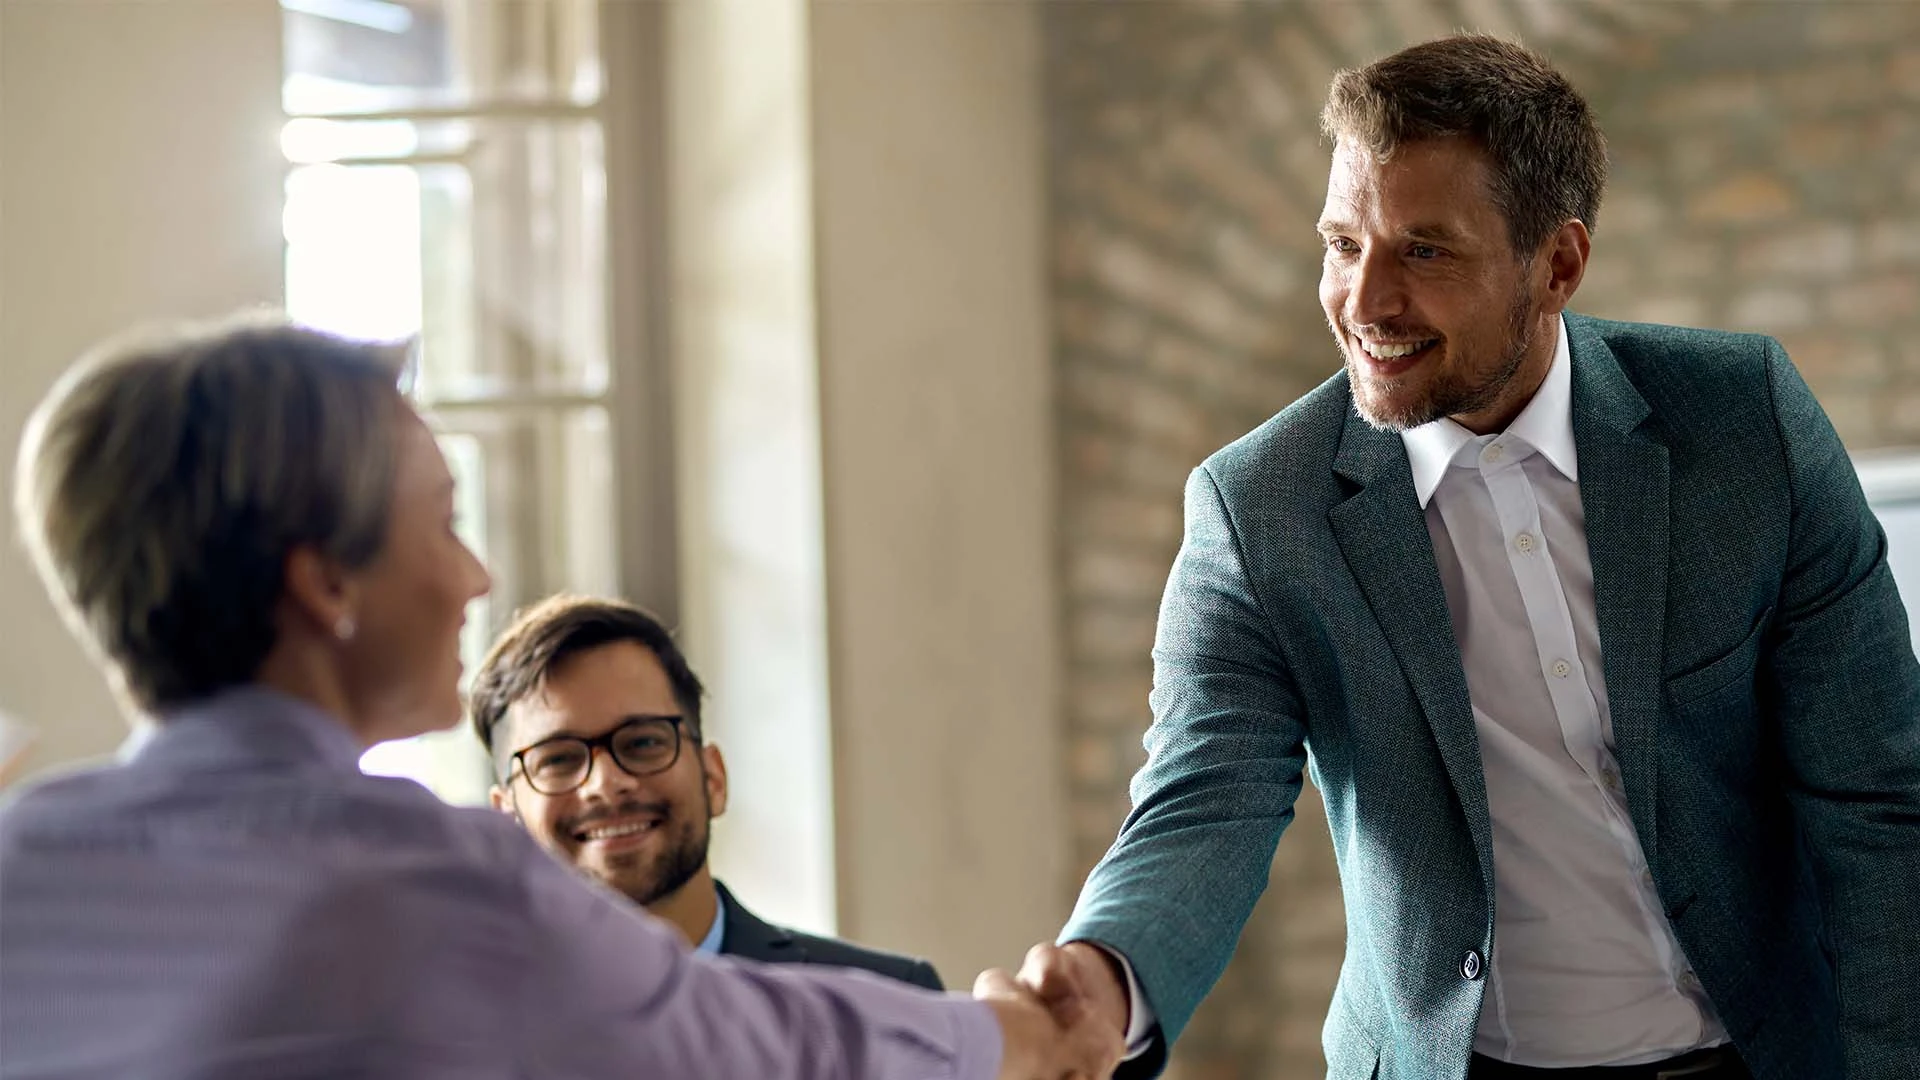 business-coworkers-shaking-hands-during-meeting-office-focus-is-businessman